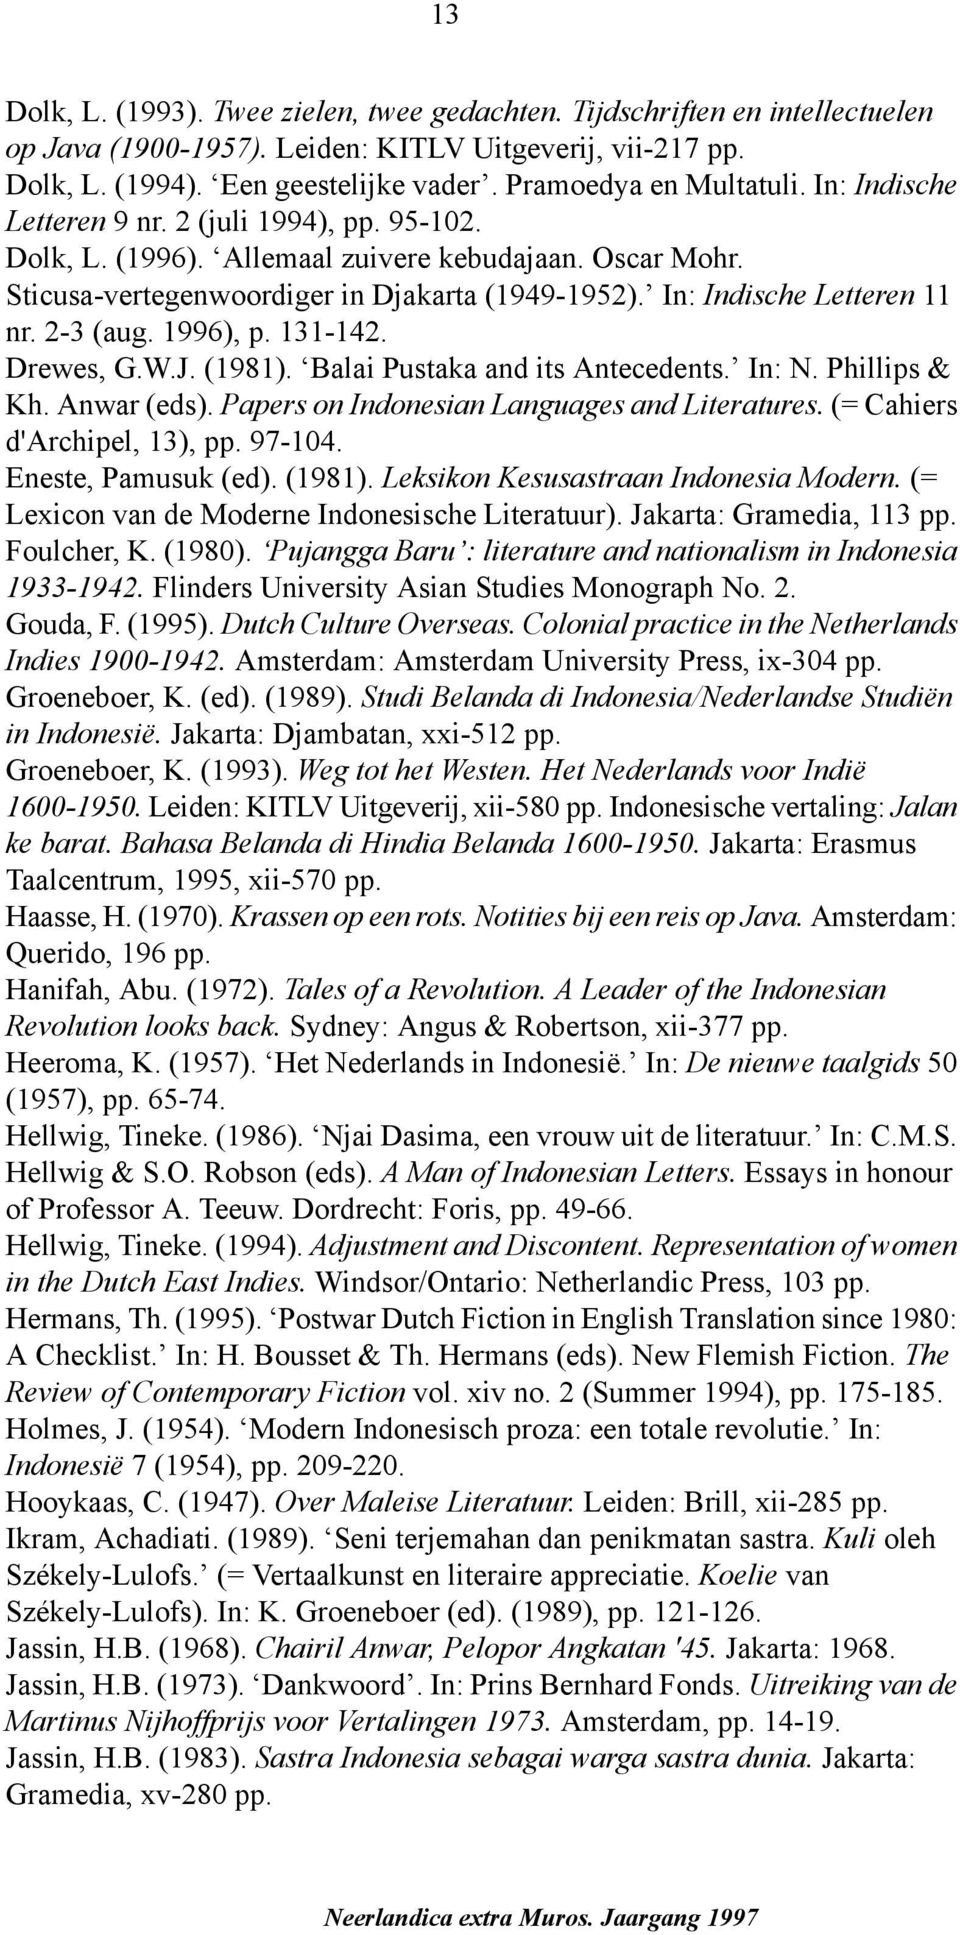 In: Indische Letteren 11 nr. 2-3 (aug. 1996), p. 131-142. Drewes, G.W.J. (1981). Balai Pustaka and its Antecedents. In: N. Phillips & Kh. Anwar (eds). Papers on Indonesian Languages and Literatures.